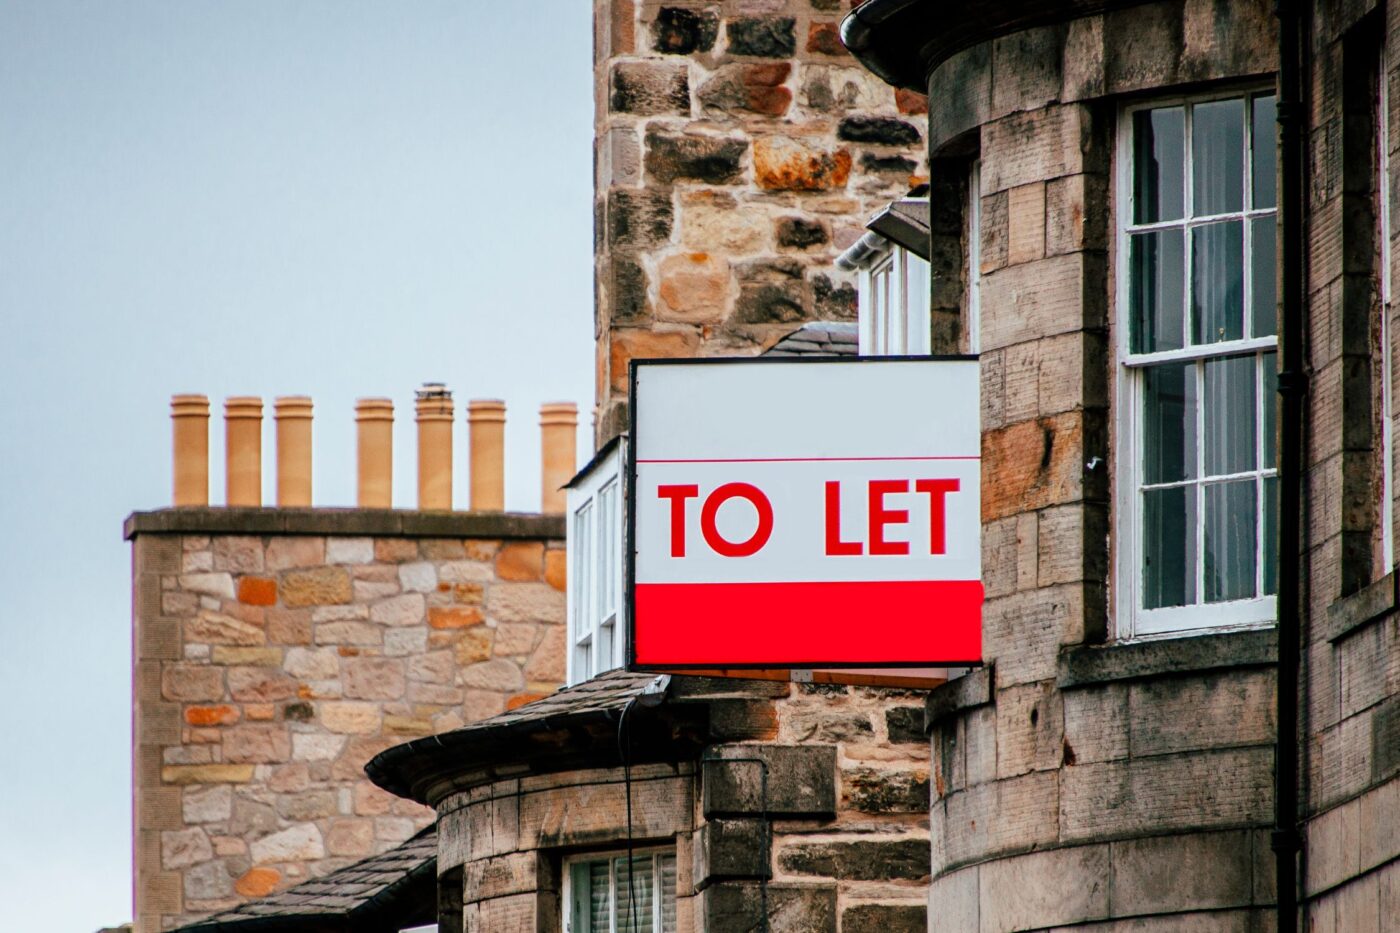 Buy-to-let property mistakes